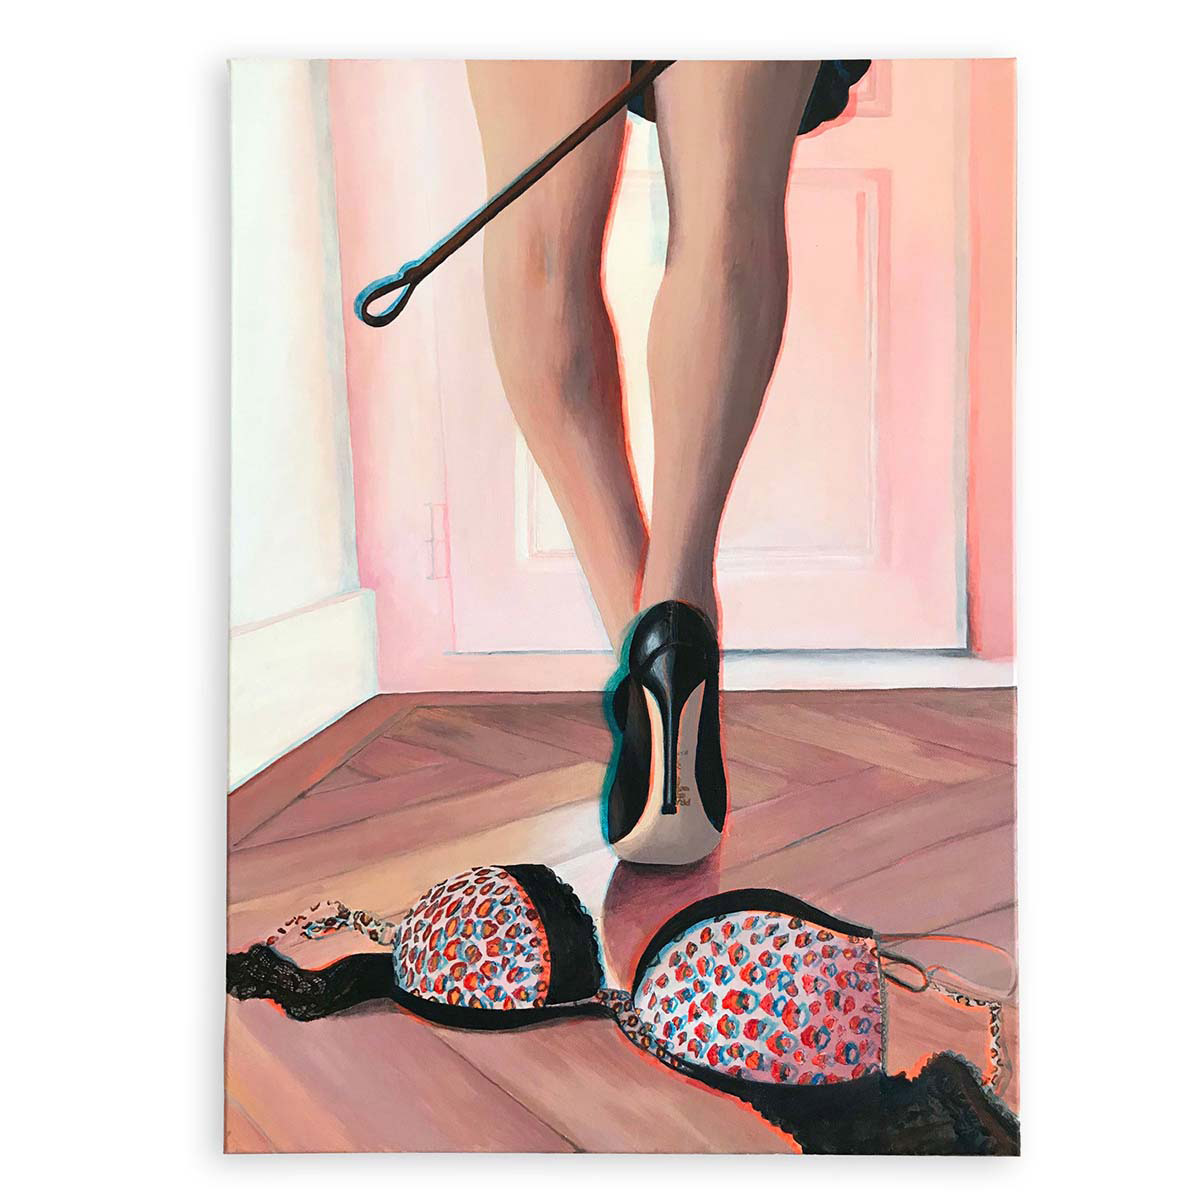 Anaglyphic Prada pumps with whip, Carine Bovey, 3d painting